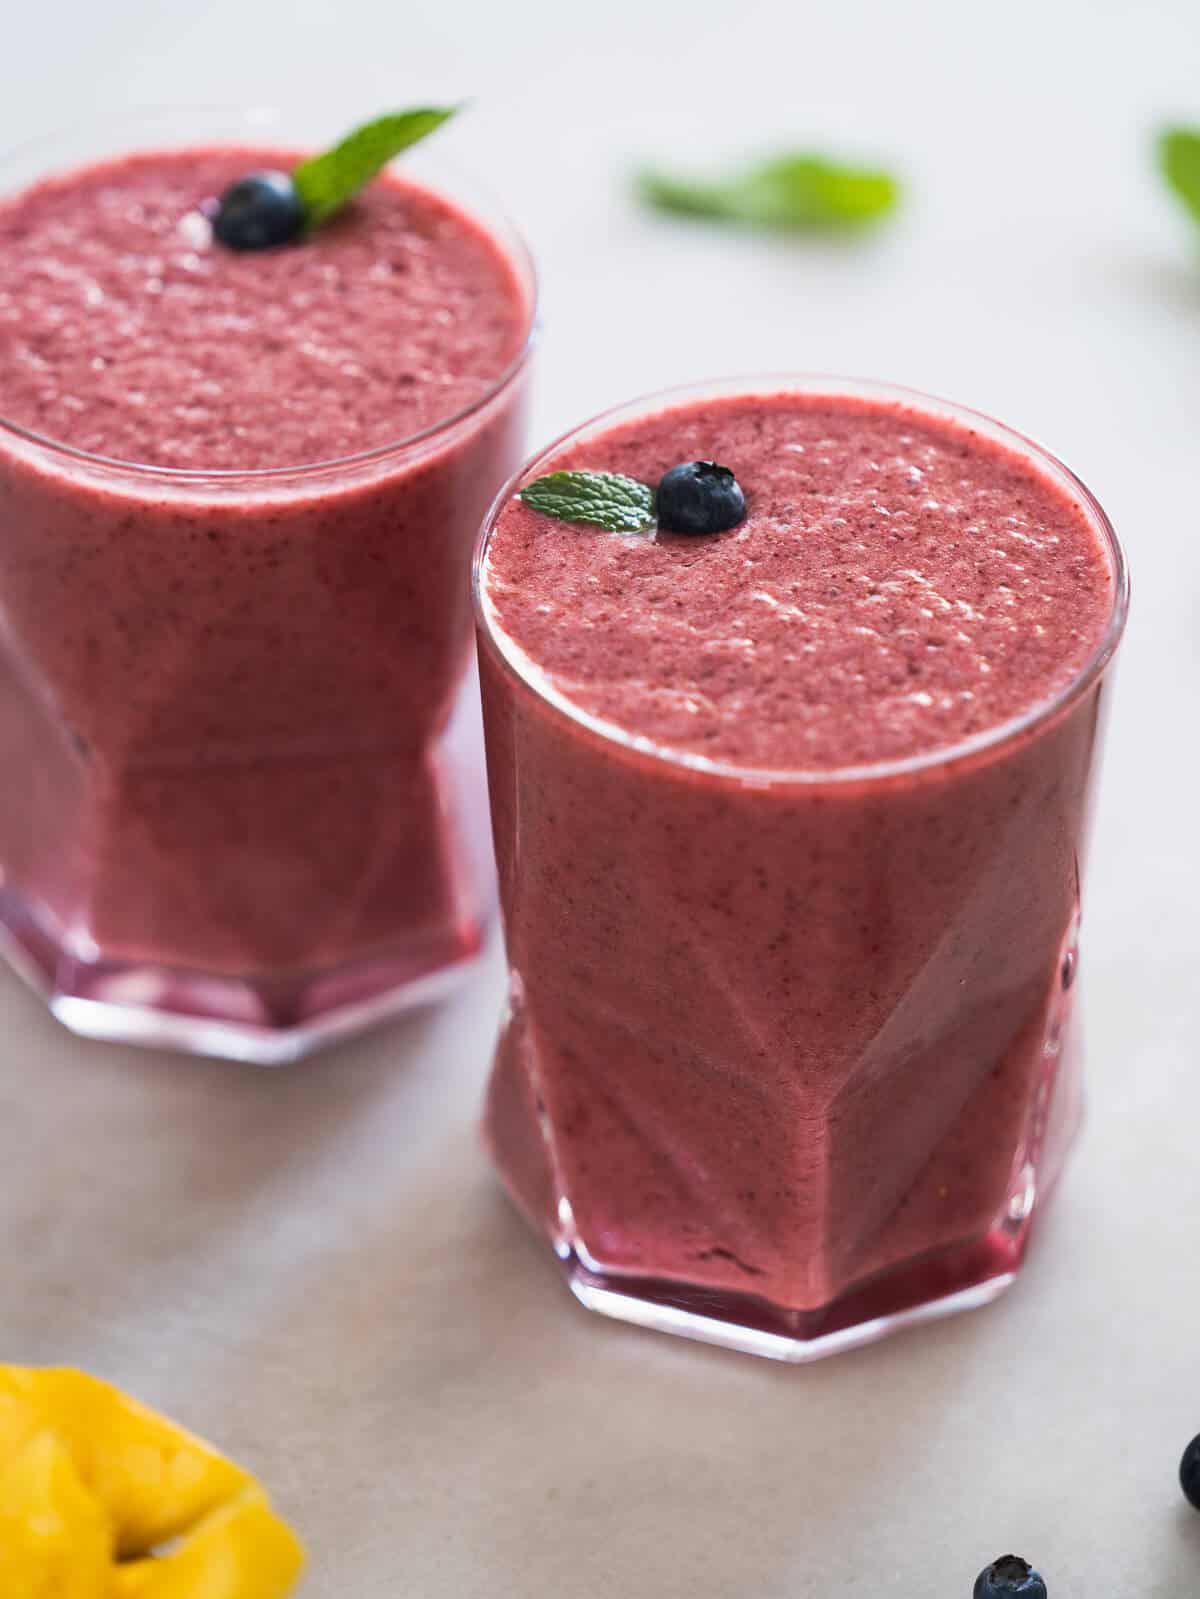 Pineapple Blueberry Juice served with blueberries and mint leaves on top.